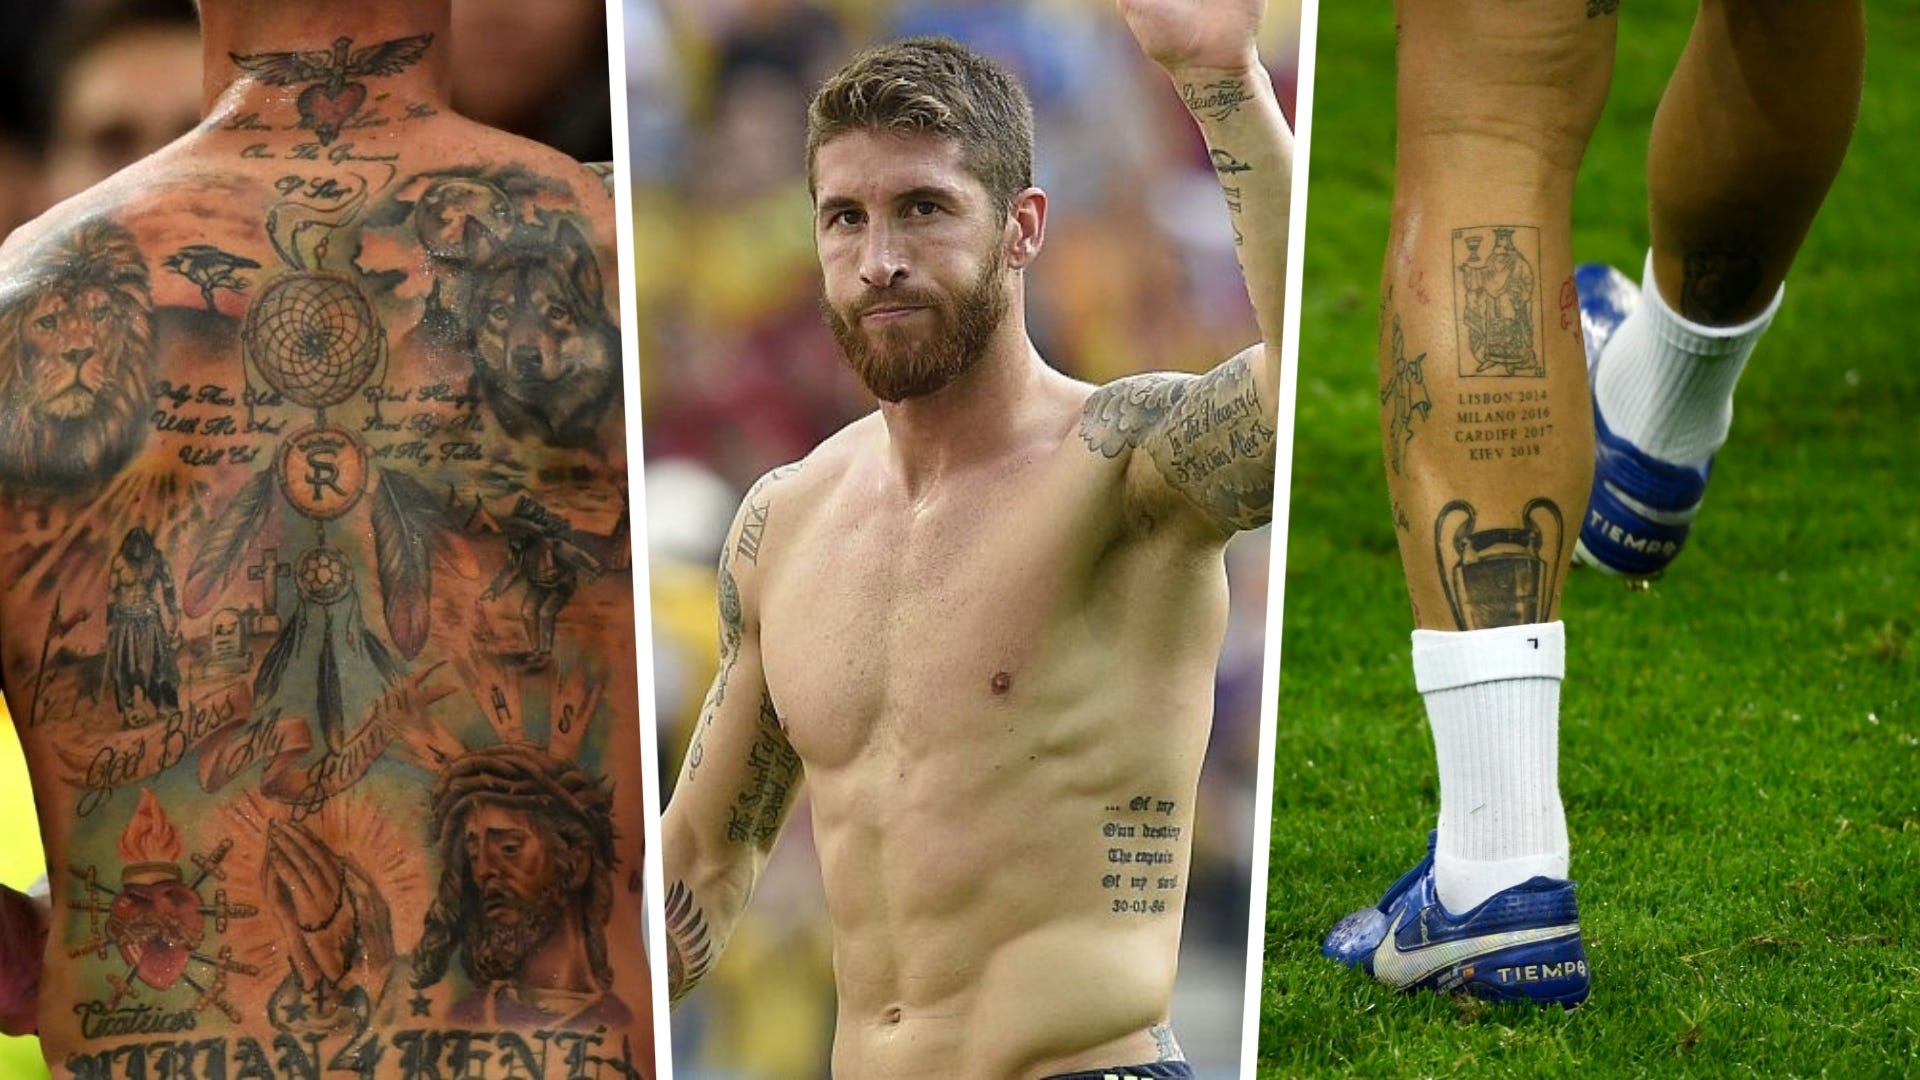 What are the best soccer player tattoos? From Ibrahimovic's lion to Messi's Jesus depiction